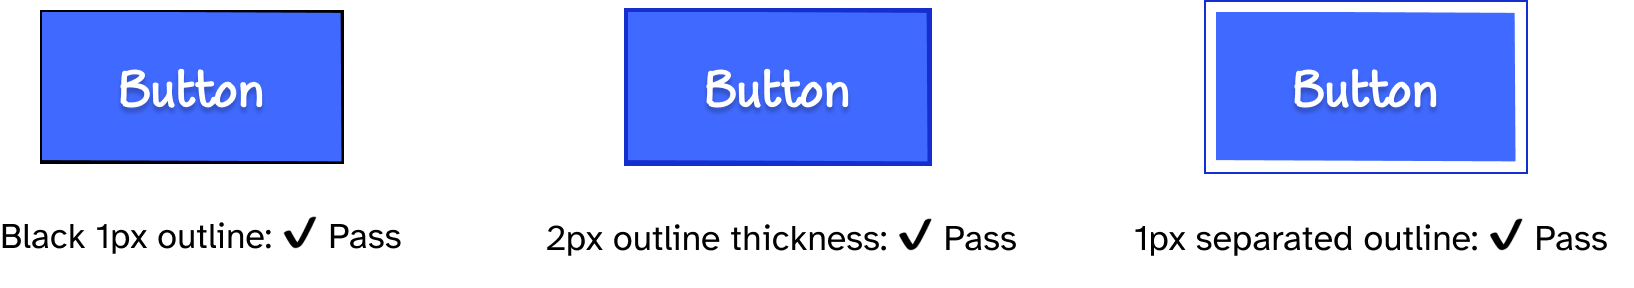 On the left is the blue button with a black 1px solid outline, and text that says 'Pass' underneath it. In the middle, is the blue button with a 2px thick dark blue outline, and text that says 'Pass'. On the right is the blue button with a 1px dark blue outline separated from the button's edges, and text that says 'Pass'.